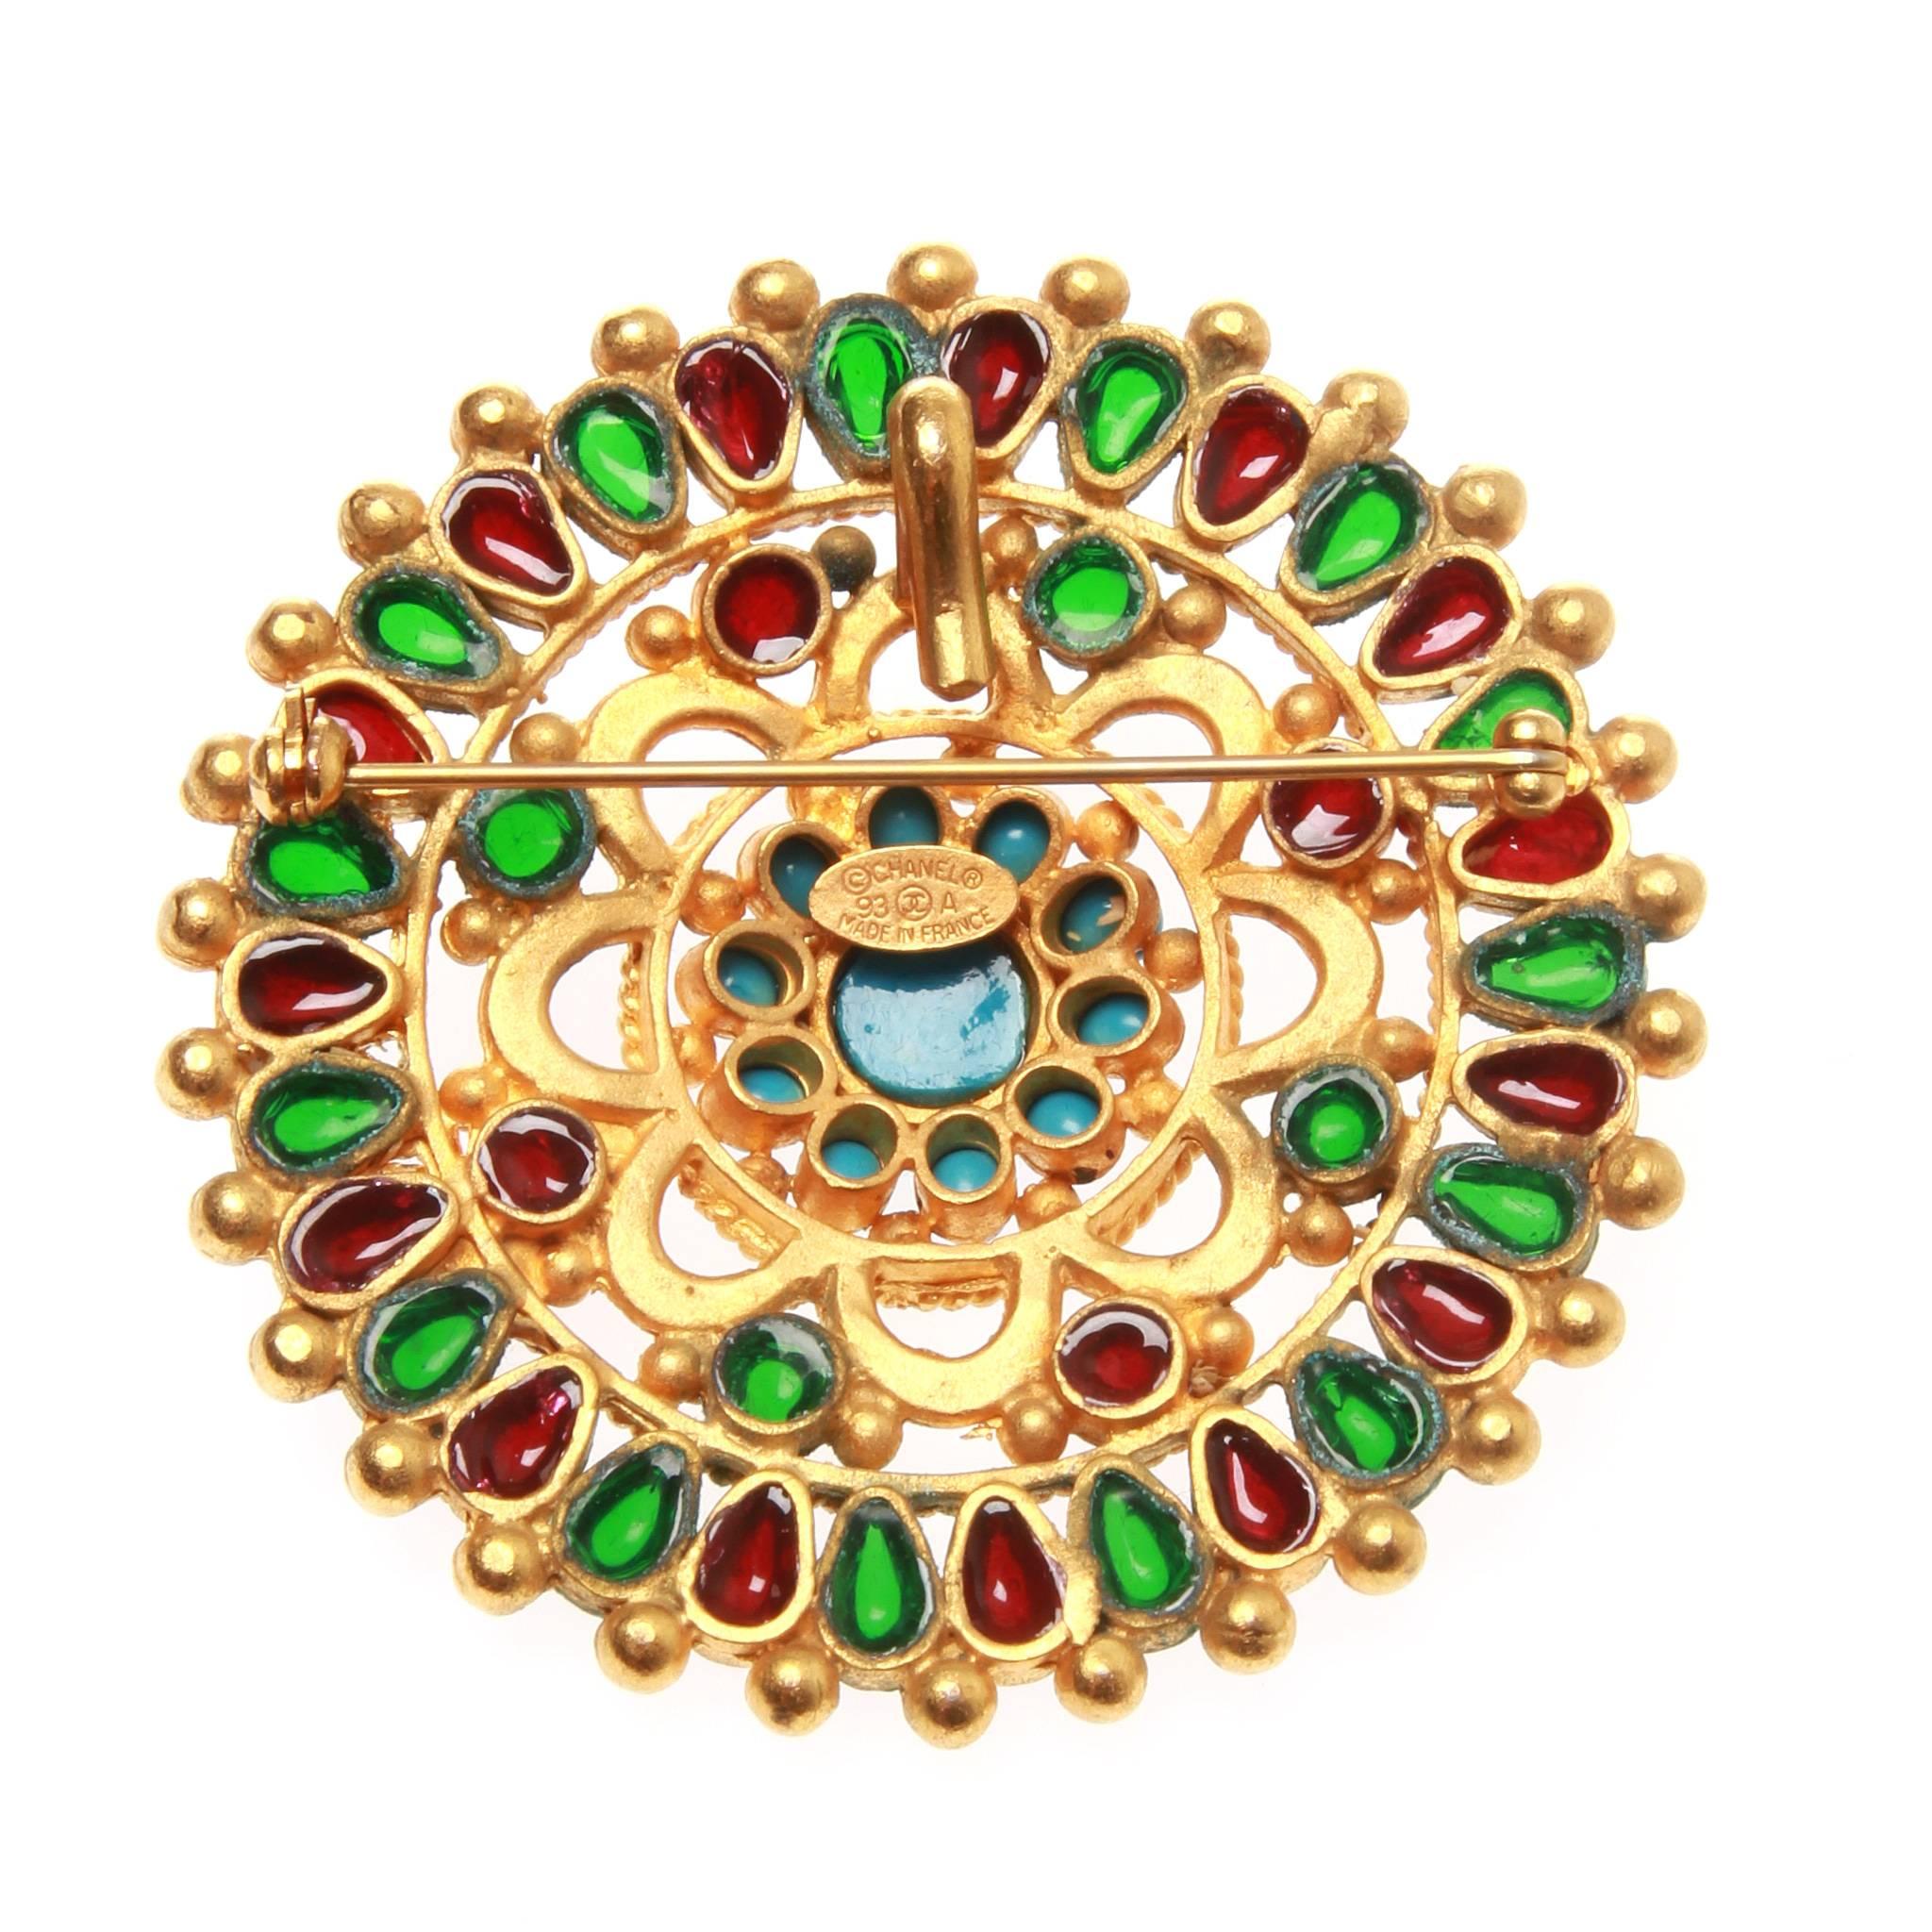 A fabulous rare Chanel massive brooch/pendant.

Open work matte gold tone metal embellished with faux precious GRIPOIX cabochons : turquoise, ruby and emerald.

Production year: Fall 1993 collection

Comes with box